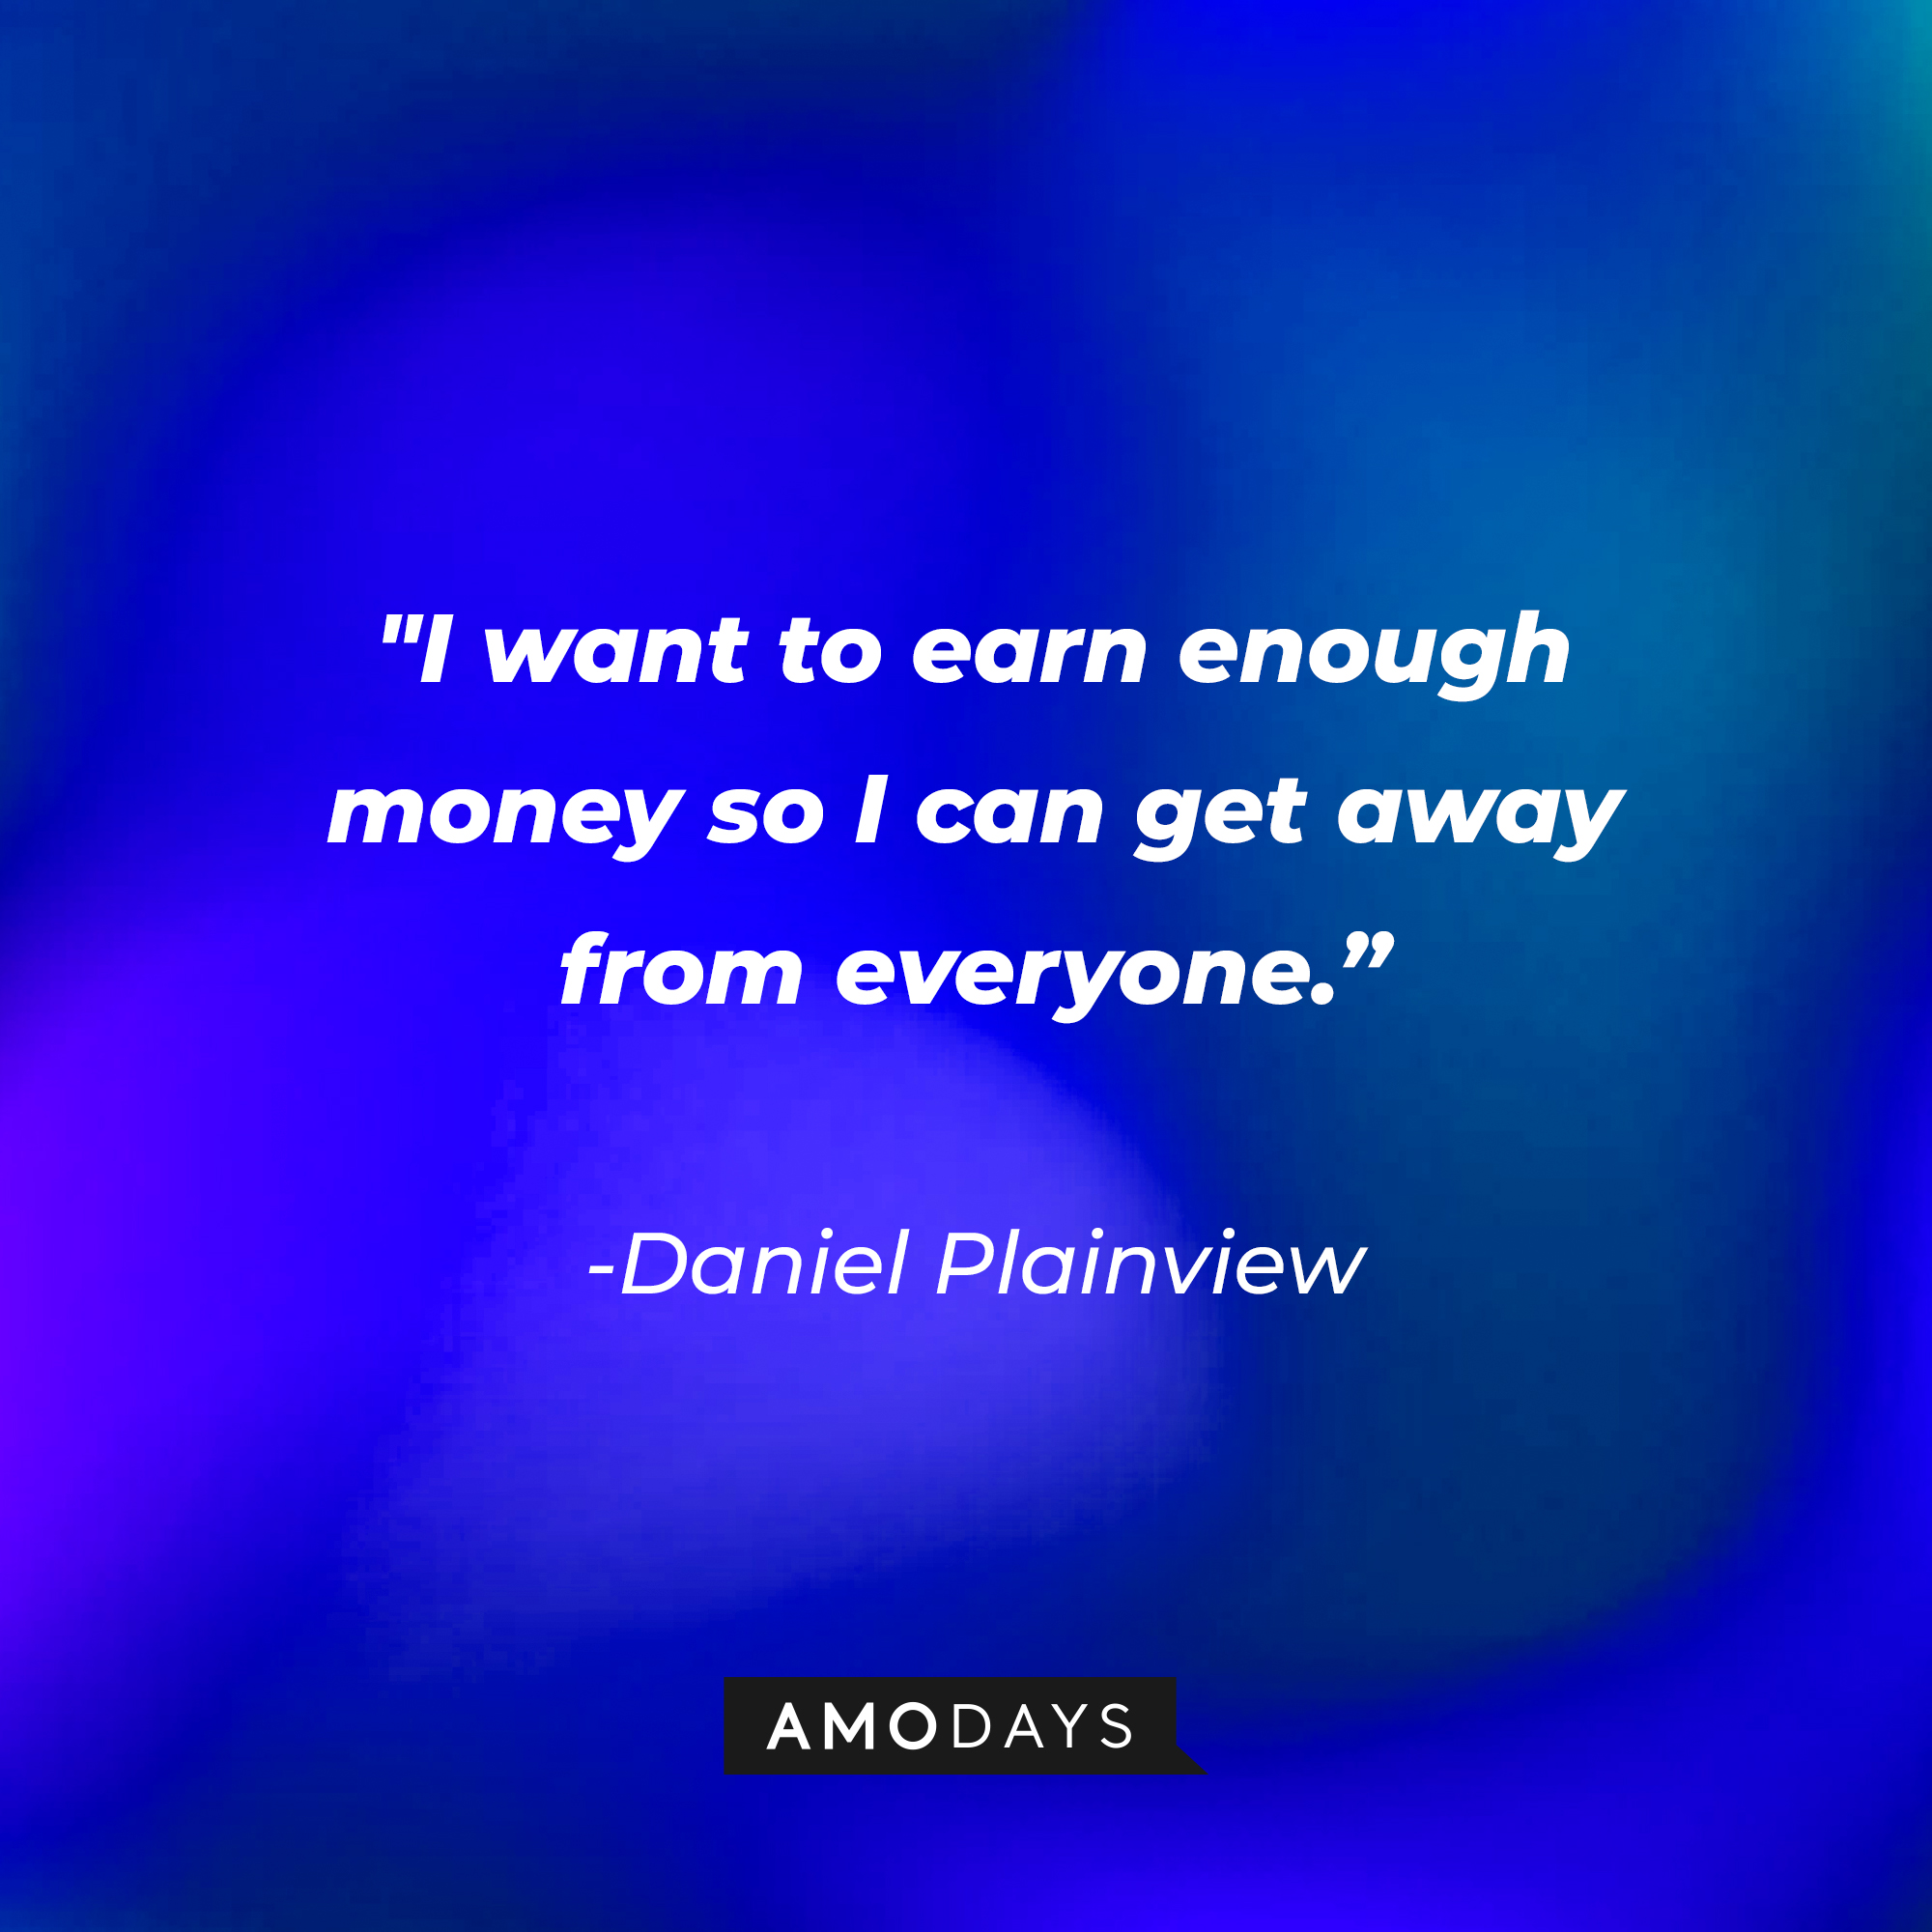 Daniel Plainview’s quote: "I want to earn enough money so I can get away from everyone.” | Source: AmoDays